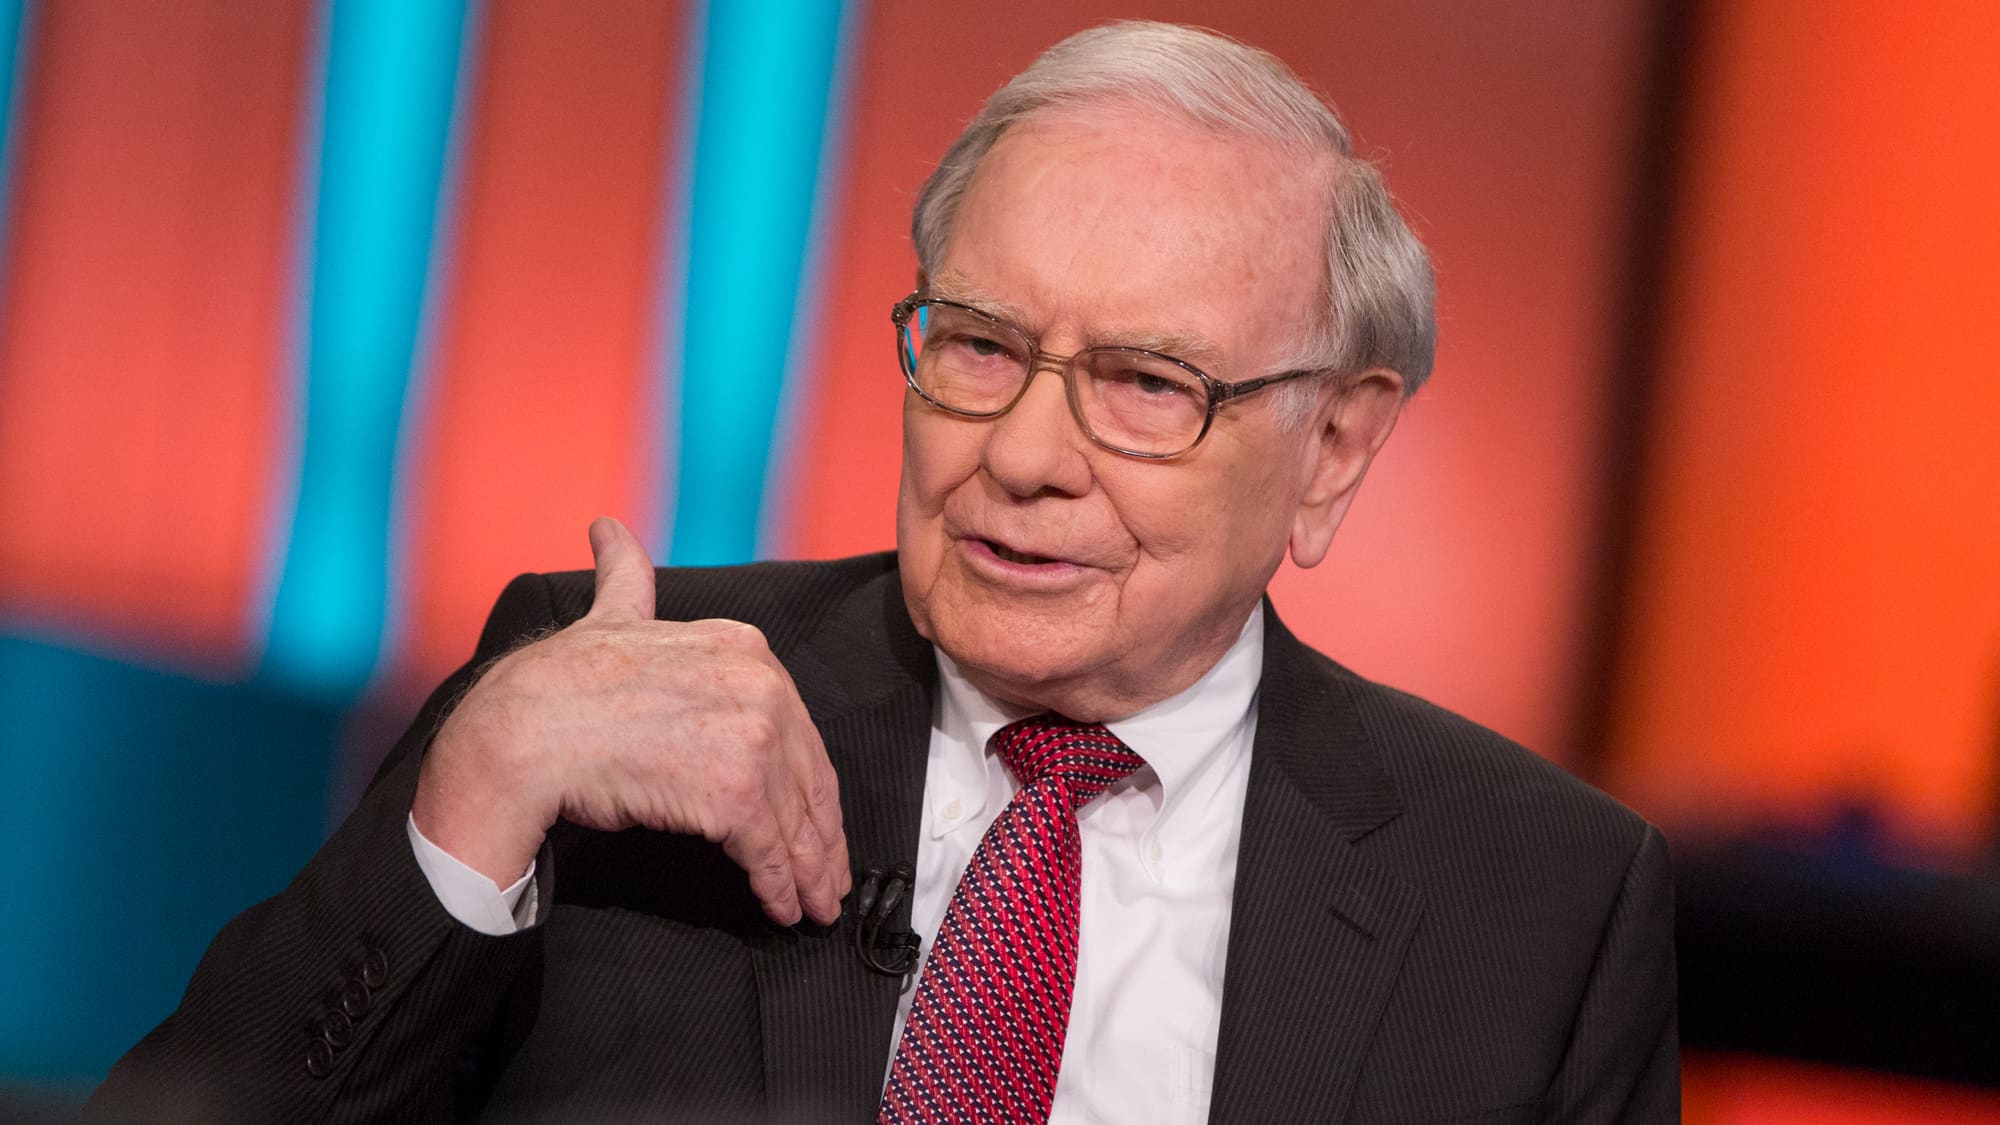 The 7 Rules of Investing according to Warren Buffett